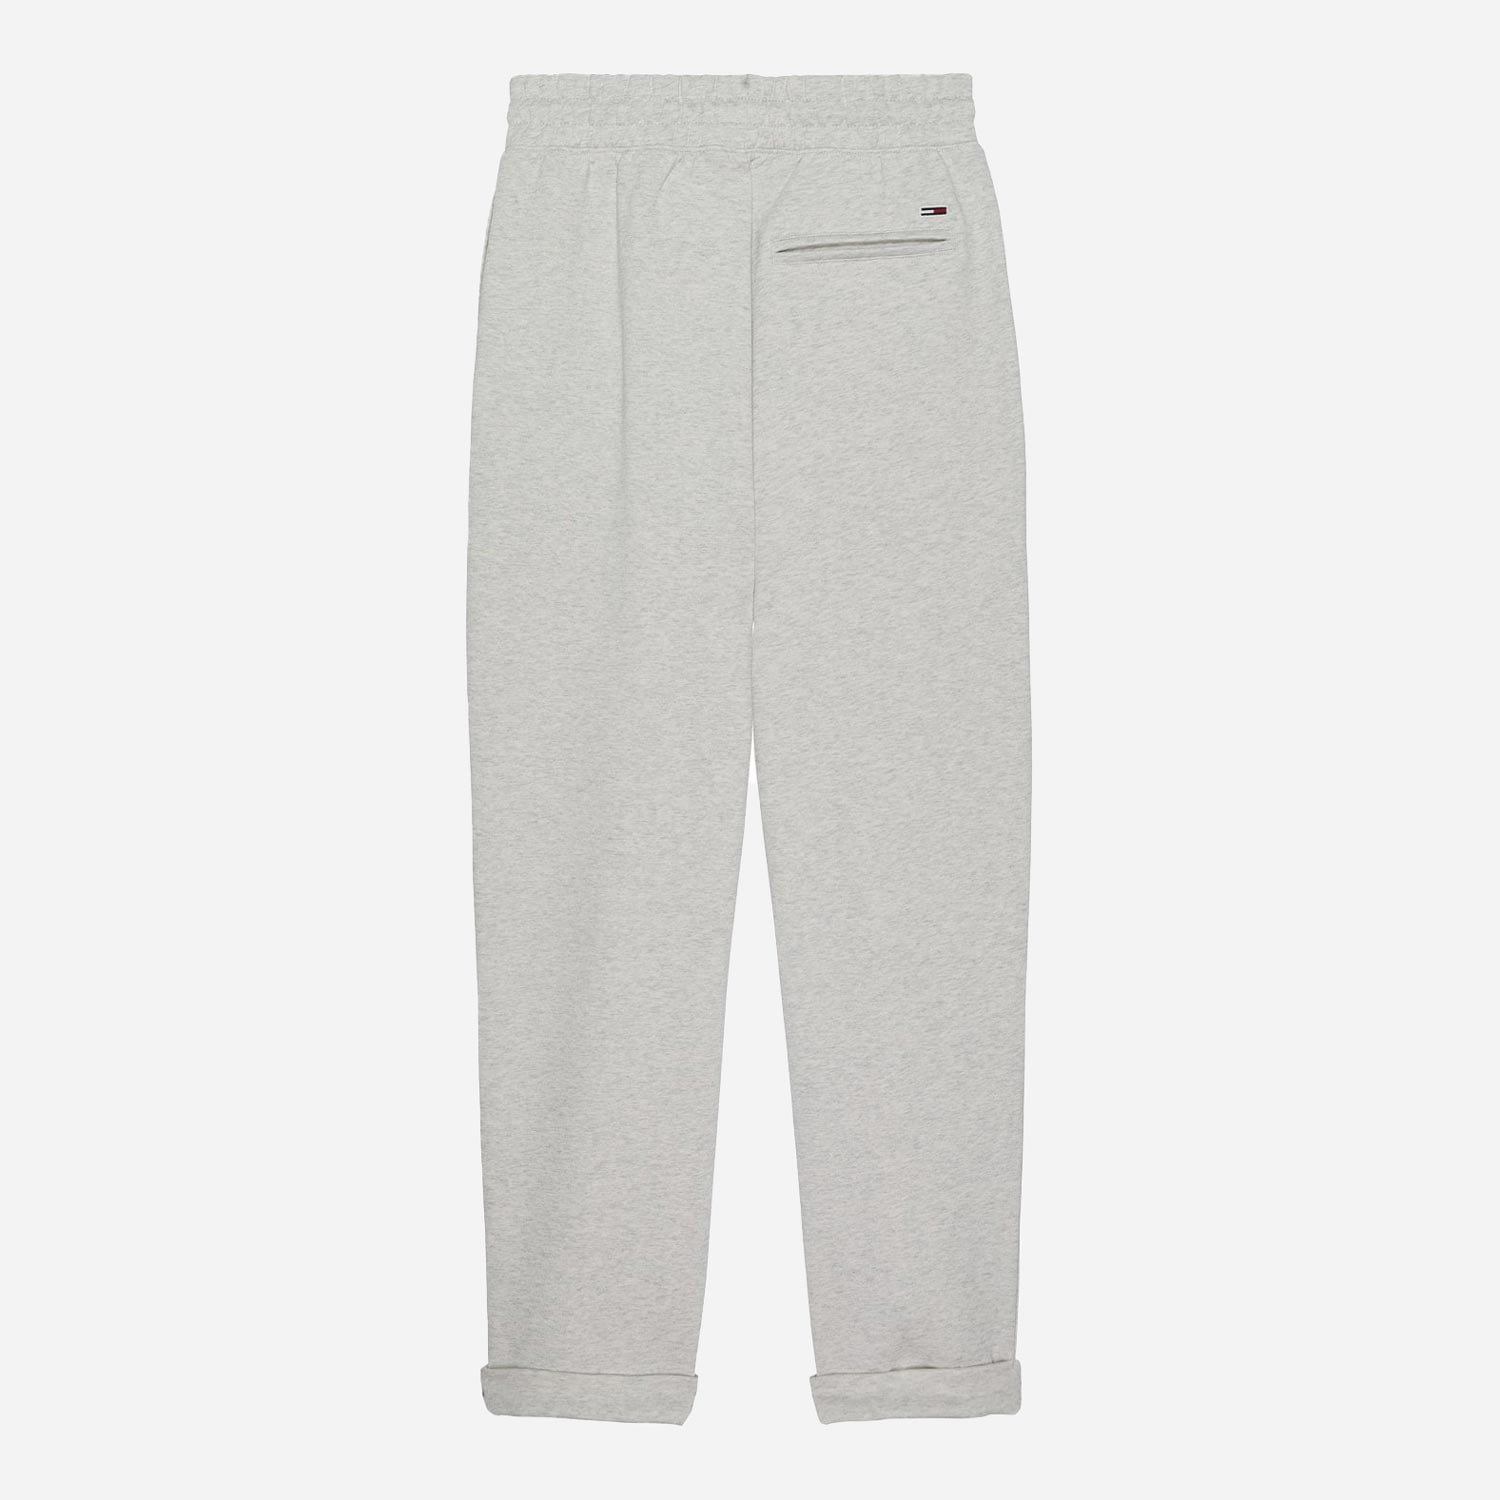 Tommy Jeans Woman's Modern Athletic Jogger - Silver Grey Heather